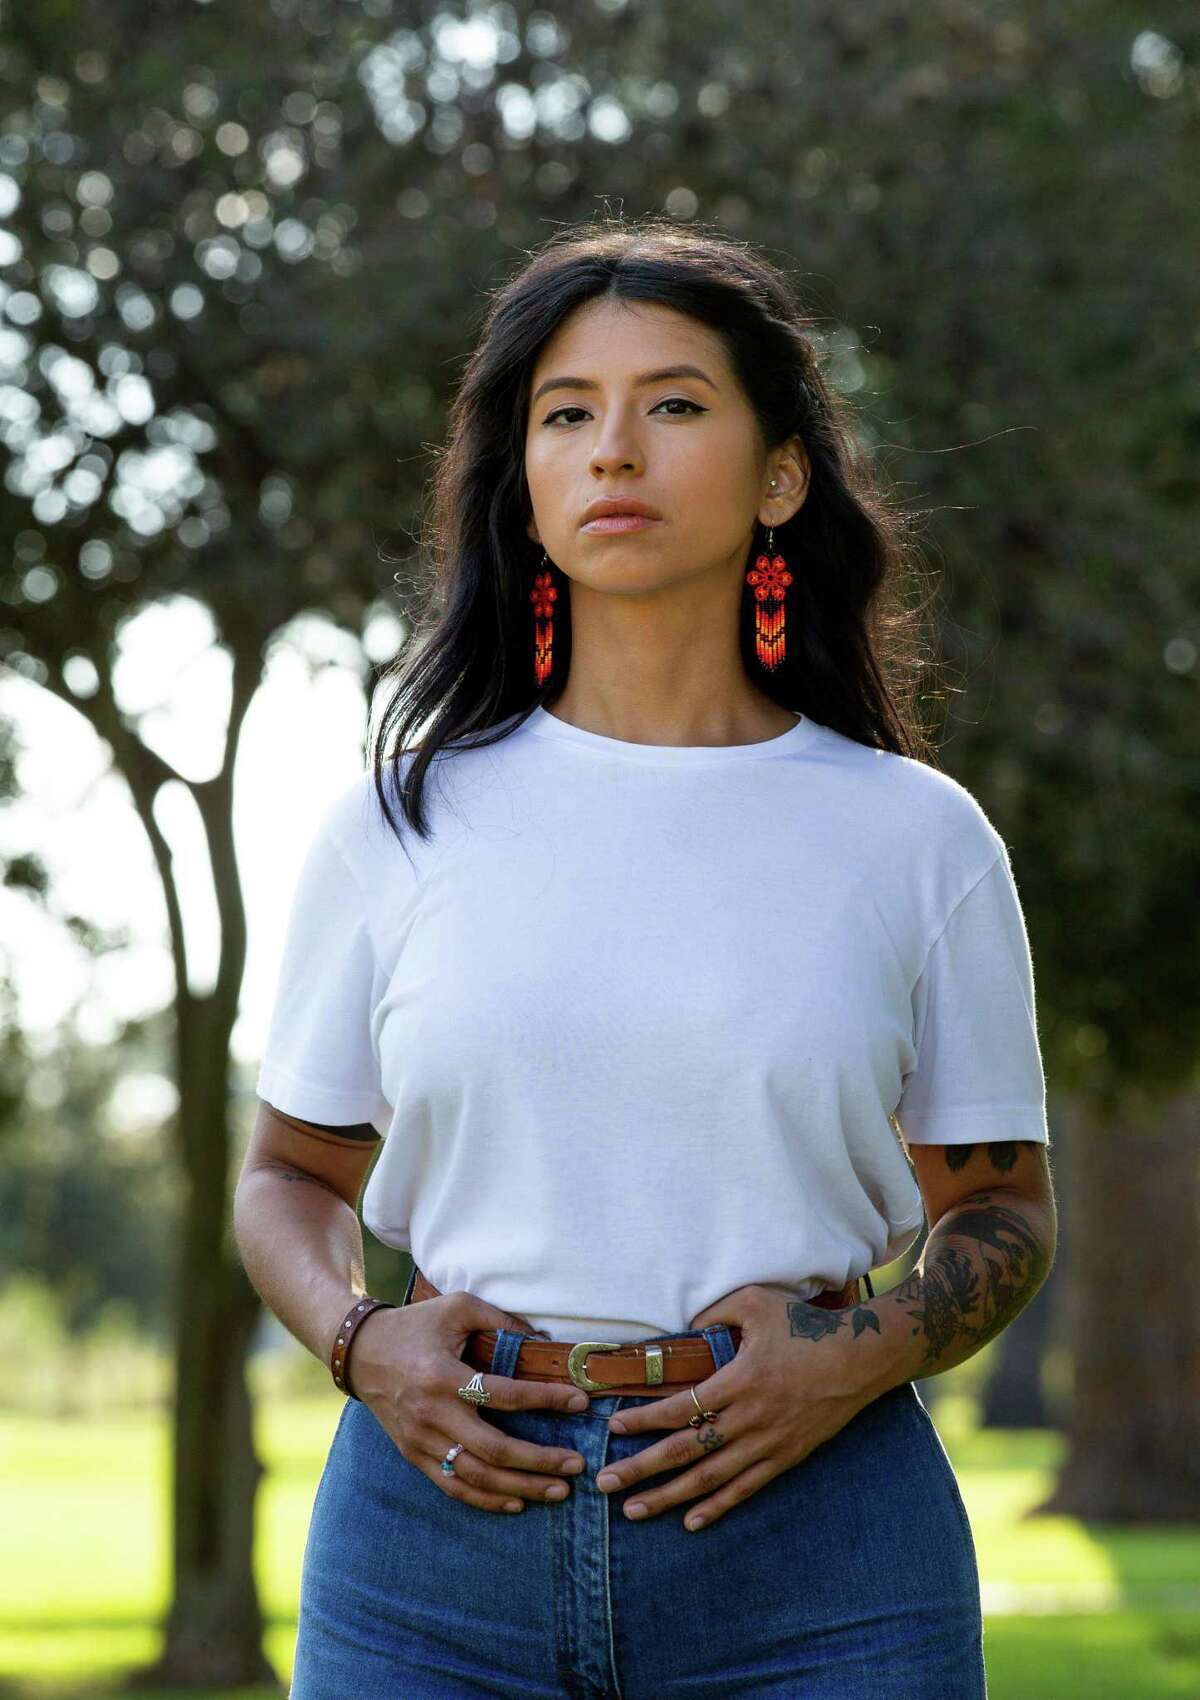 Ashley Solis in Moody Park on Monday, Nov. 1, 2021, in Houston. Solis, 28, a Houston massage therapist, is one of nearly two dozen professional women who accused Texans quarterback Deshaun Watson of sexual misconduct last spring.